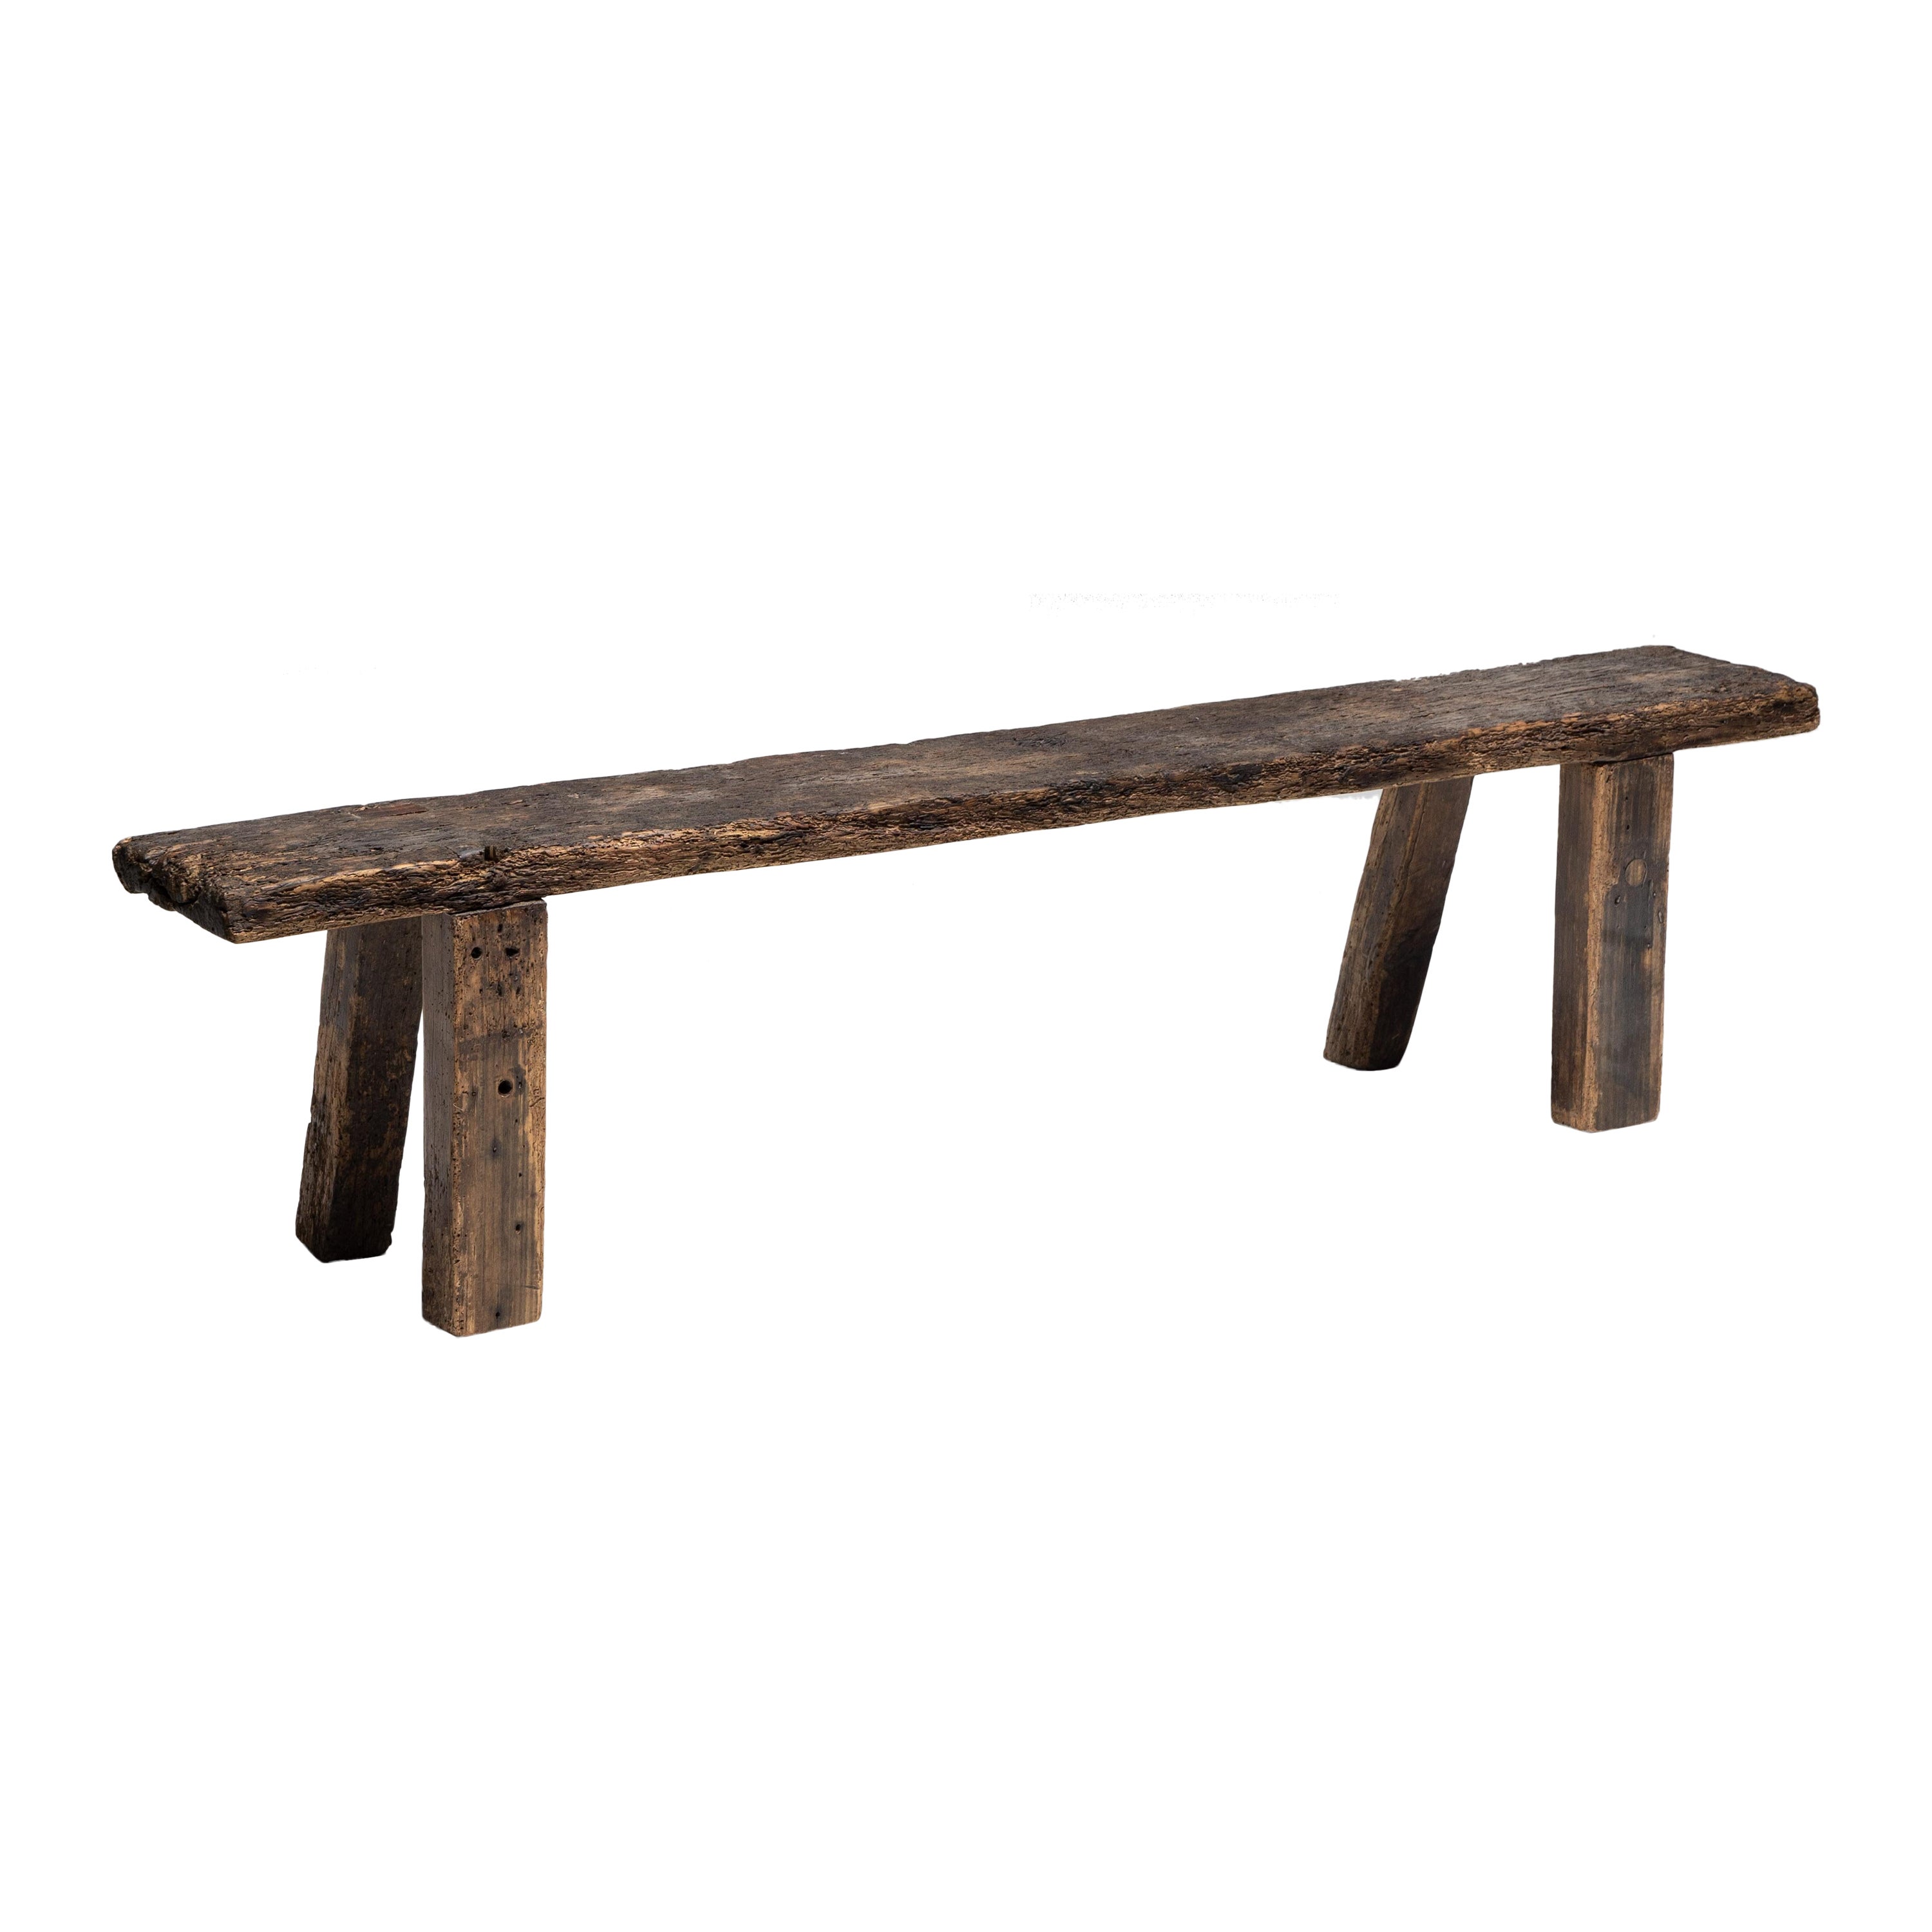 Rustic Art Populaire Bench, France, Early 20th Century For Sale